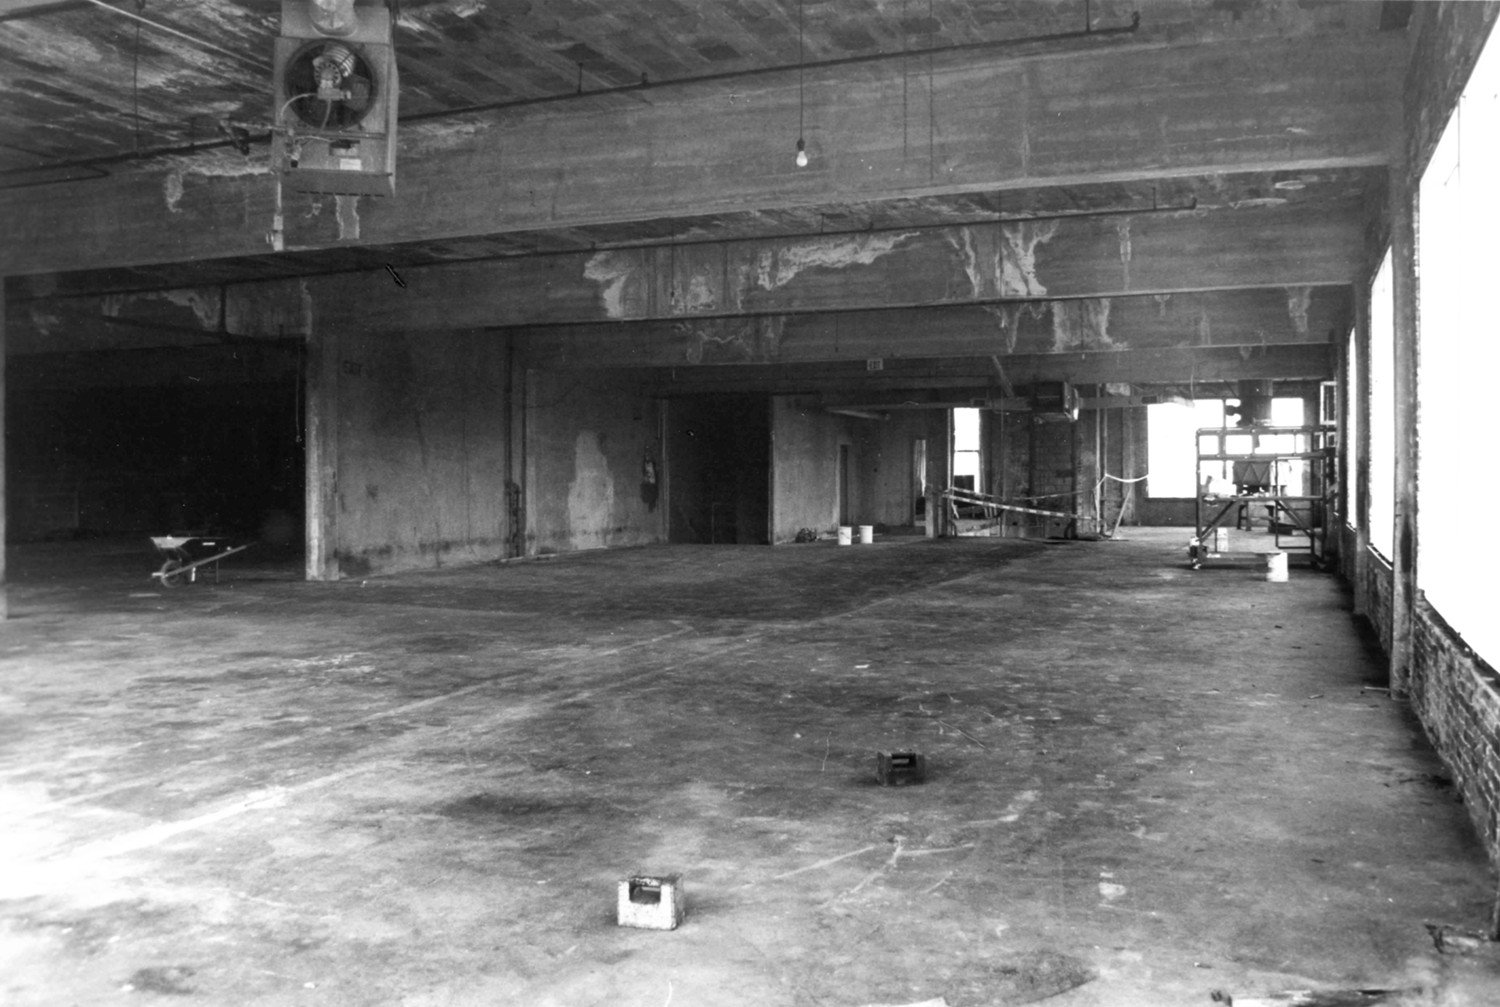 More Automobile Company - Marmon Autos, St. Louis Missouri Second floor, looking northwest from mid east wall (2002)